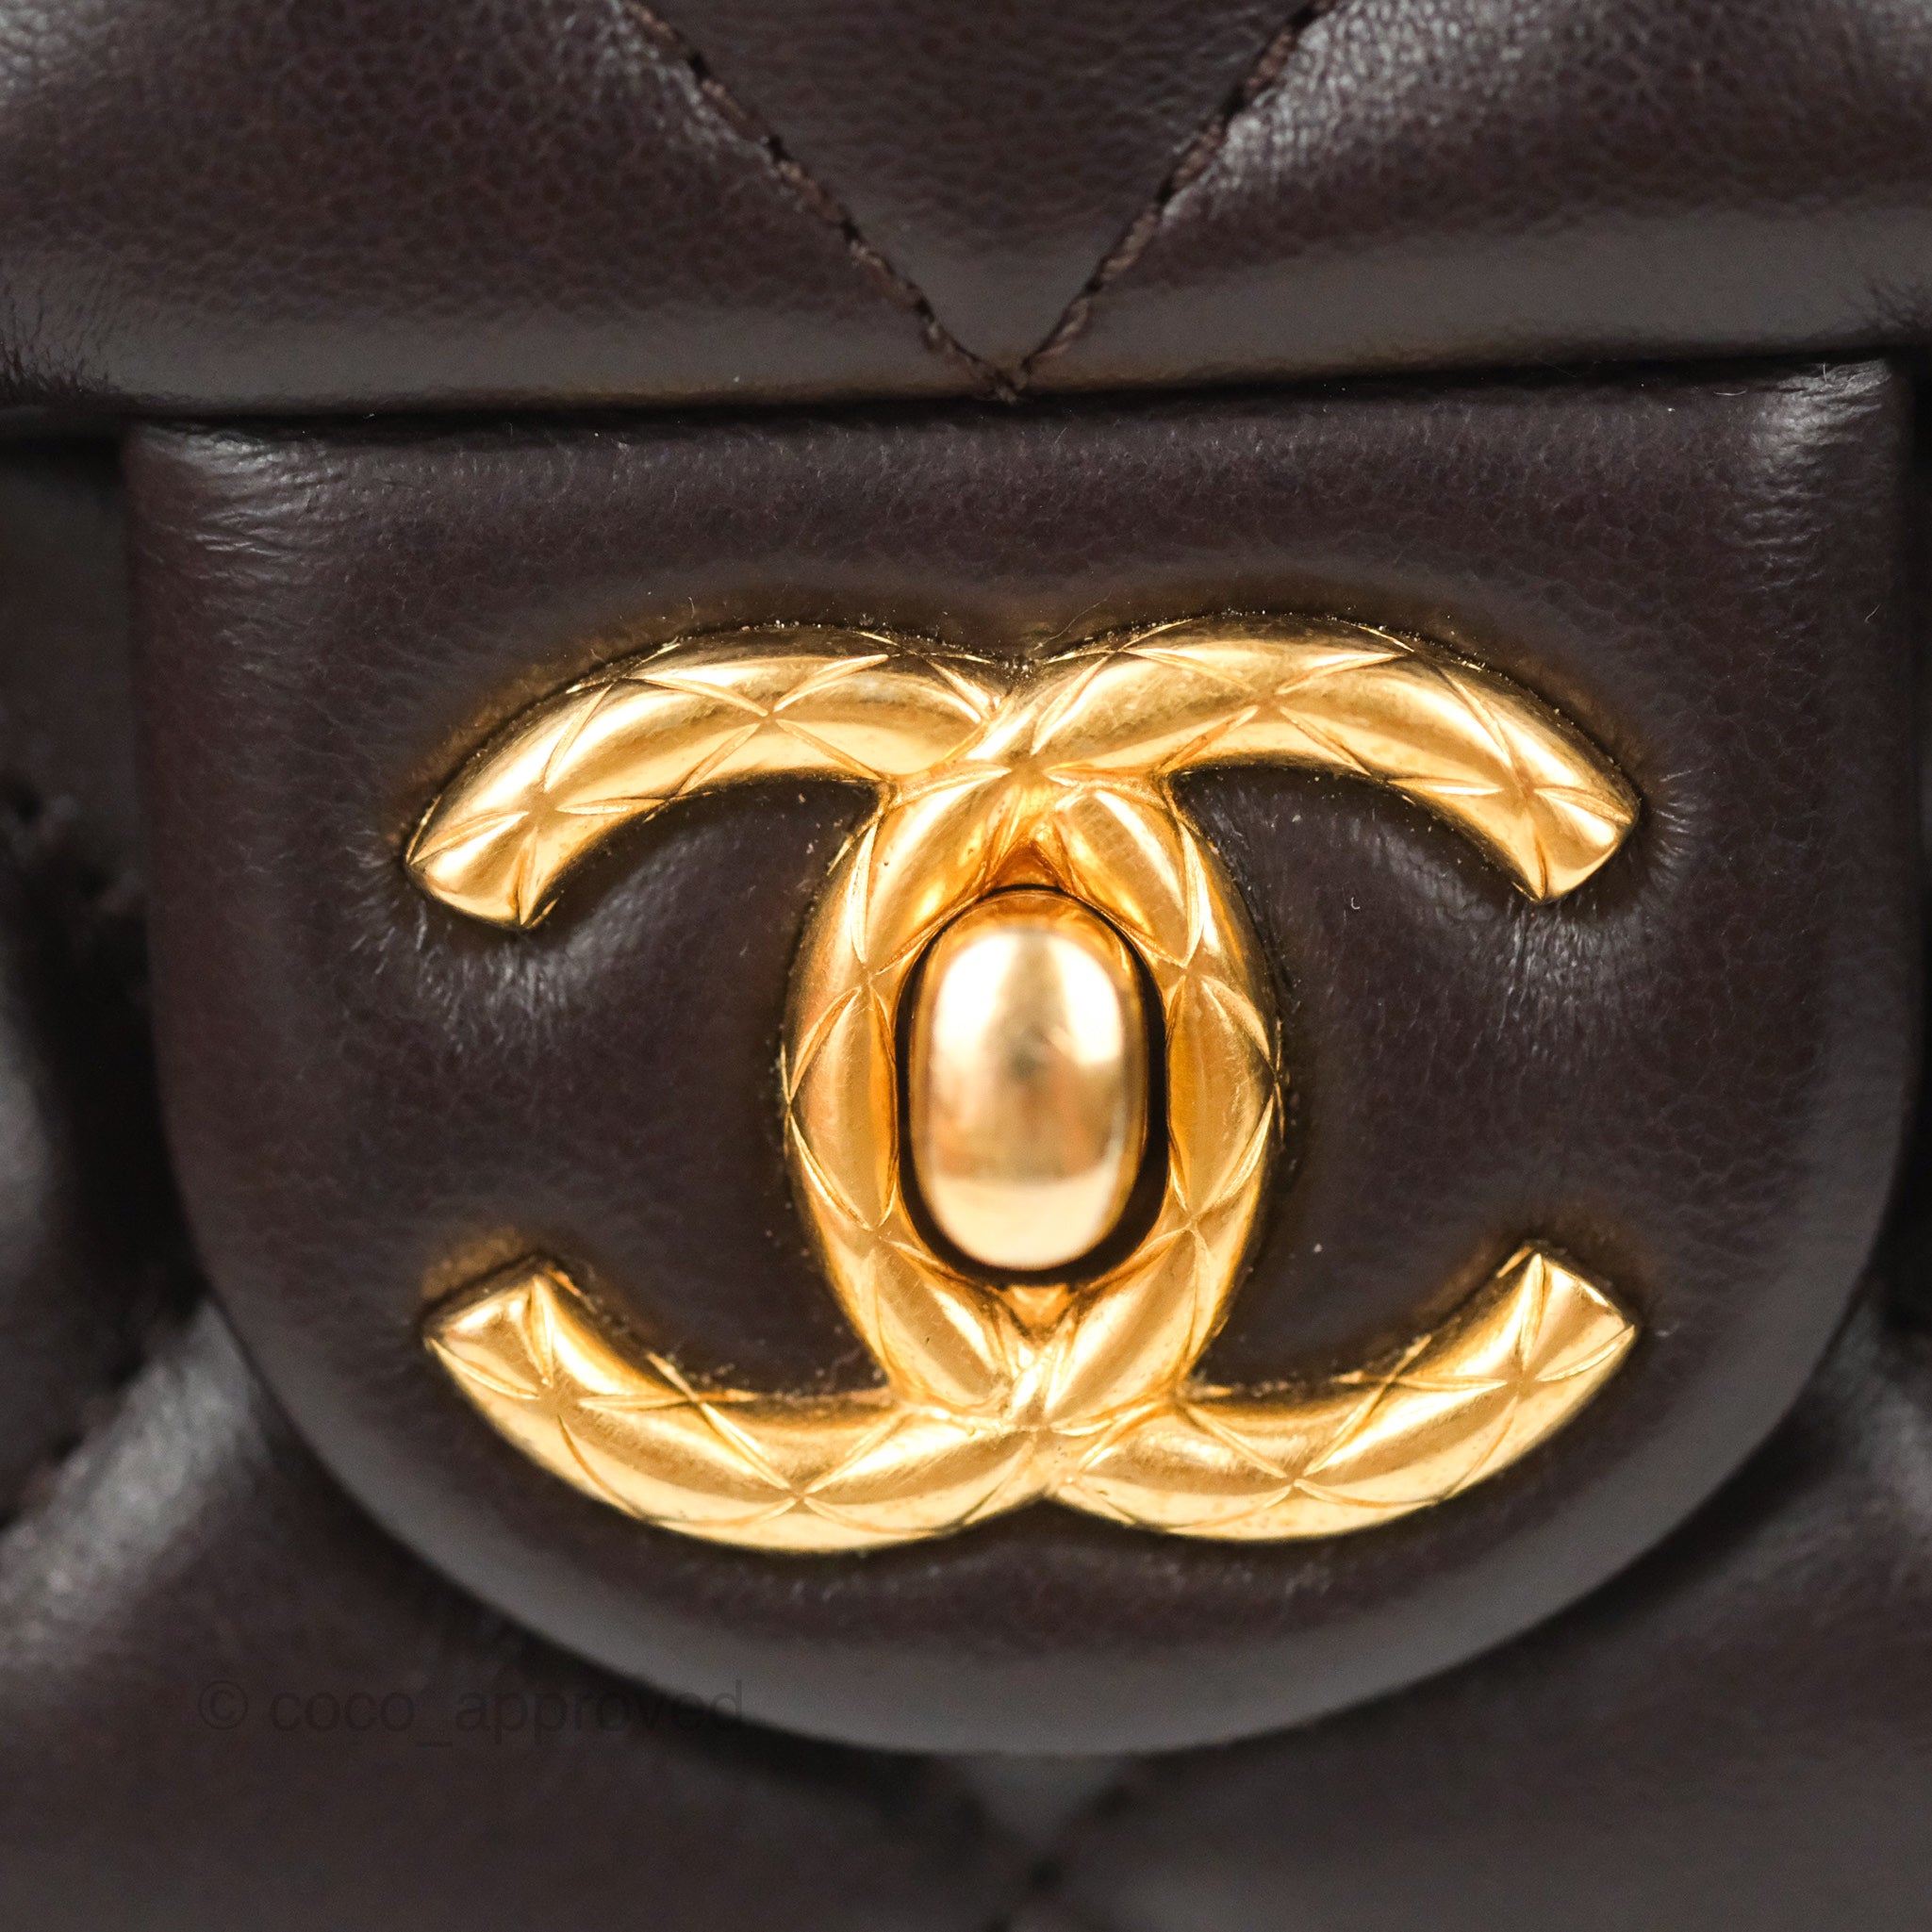 Chanel Black Quilted Lambskin Small Elegant Flap Bag Resin And Gold  Hardware, 2022 Available For Immediate Sale At Sotheby's